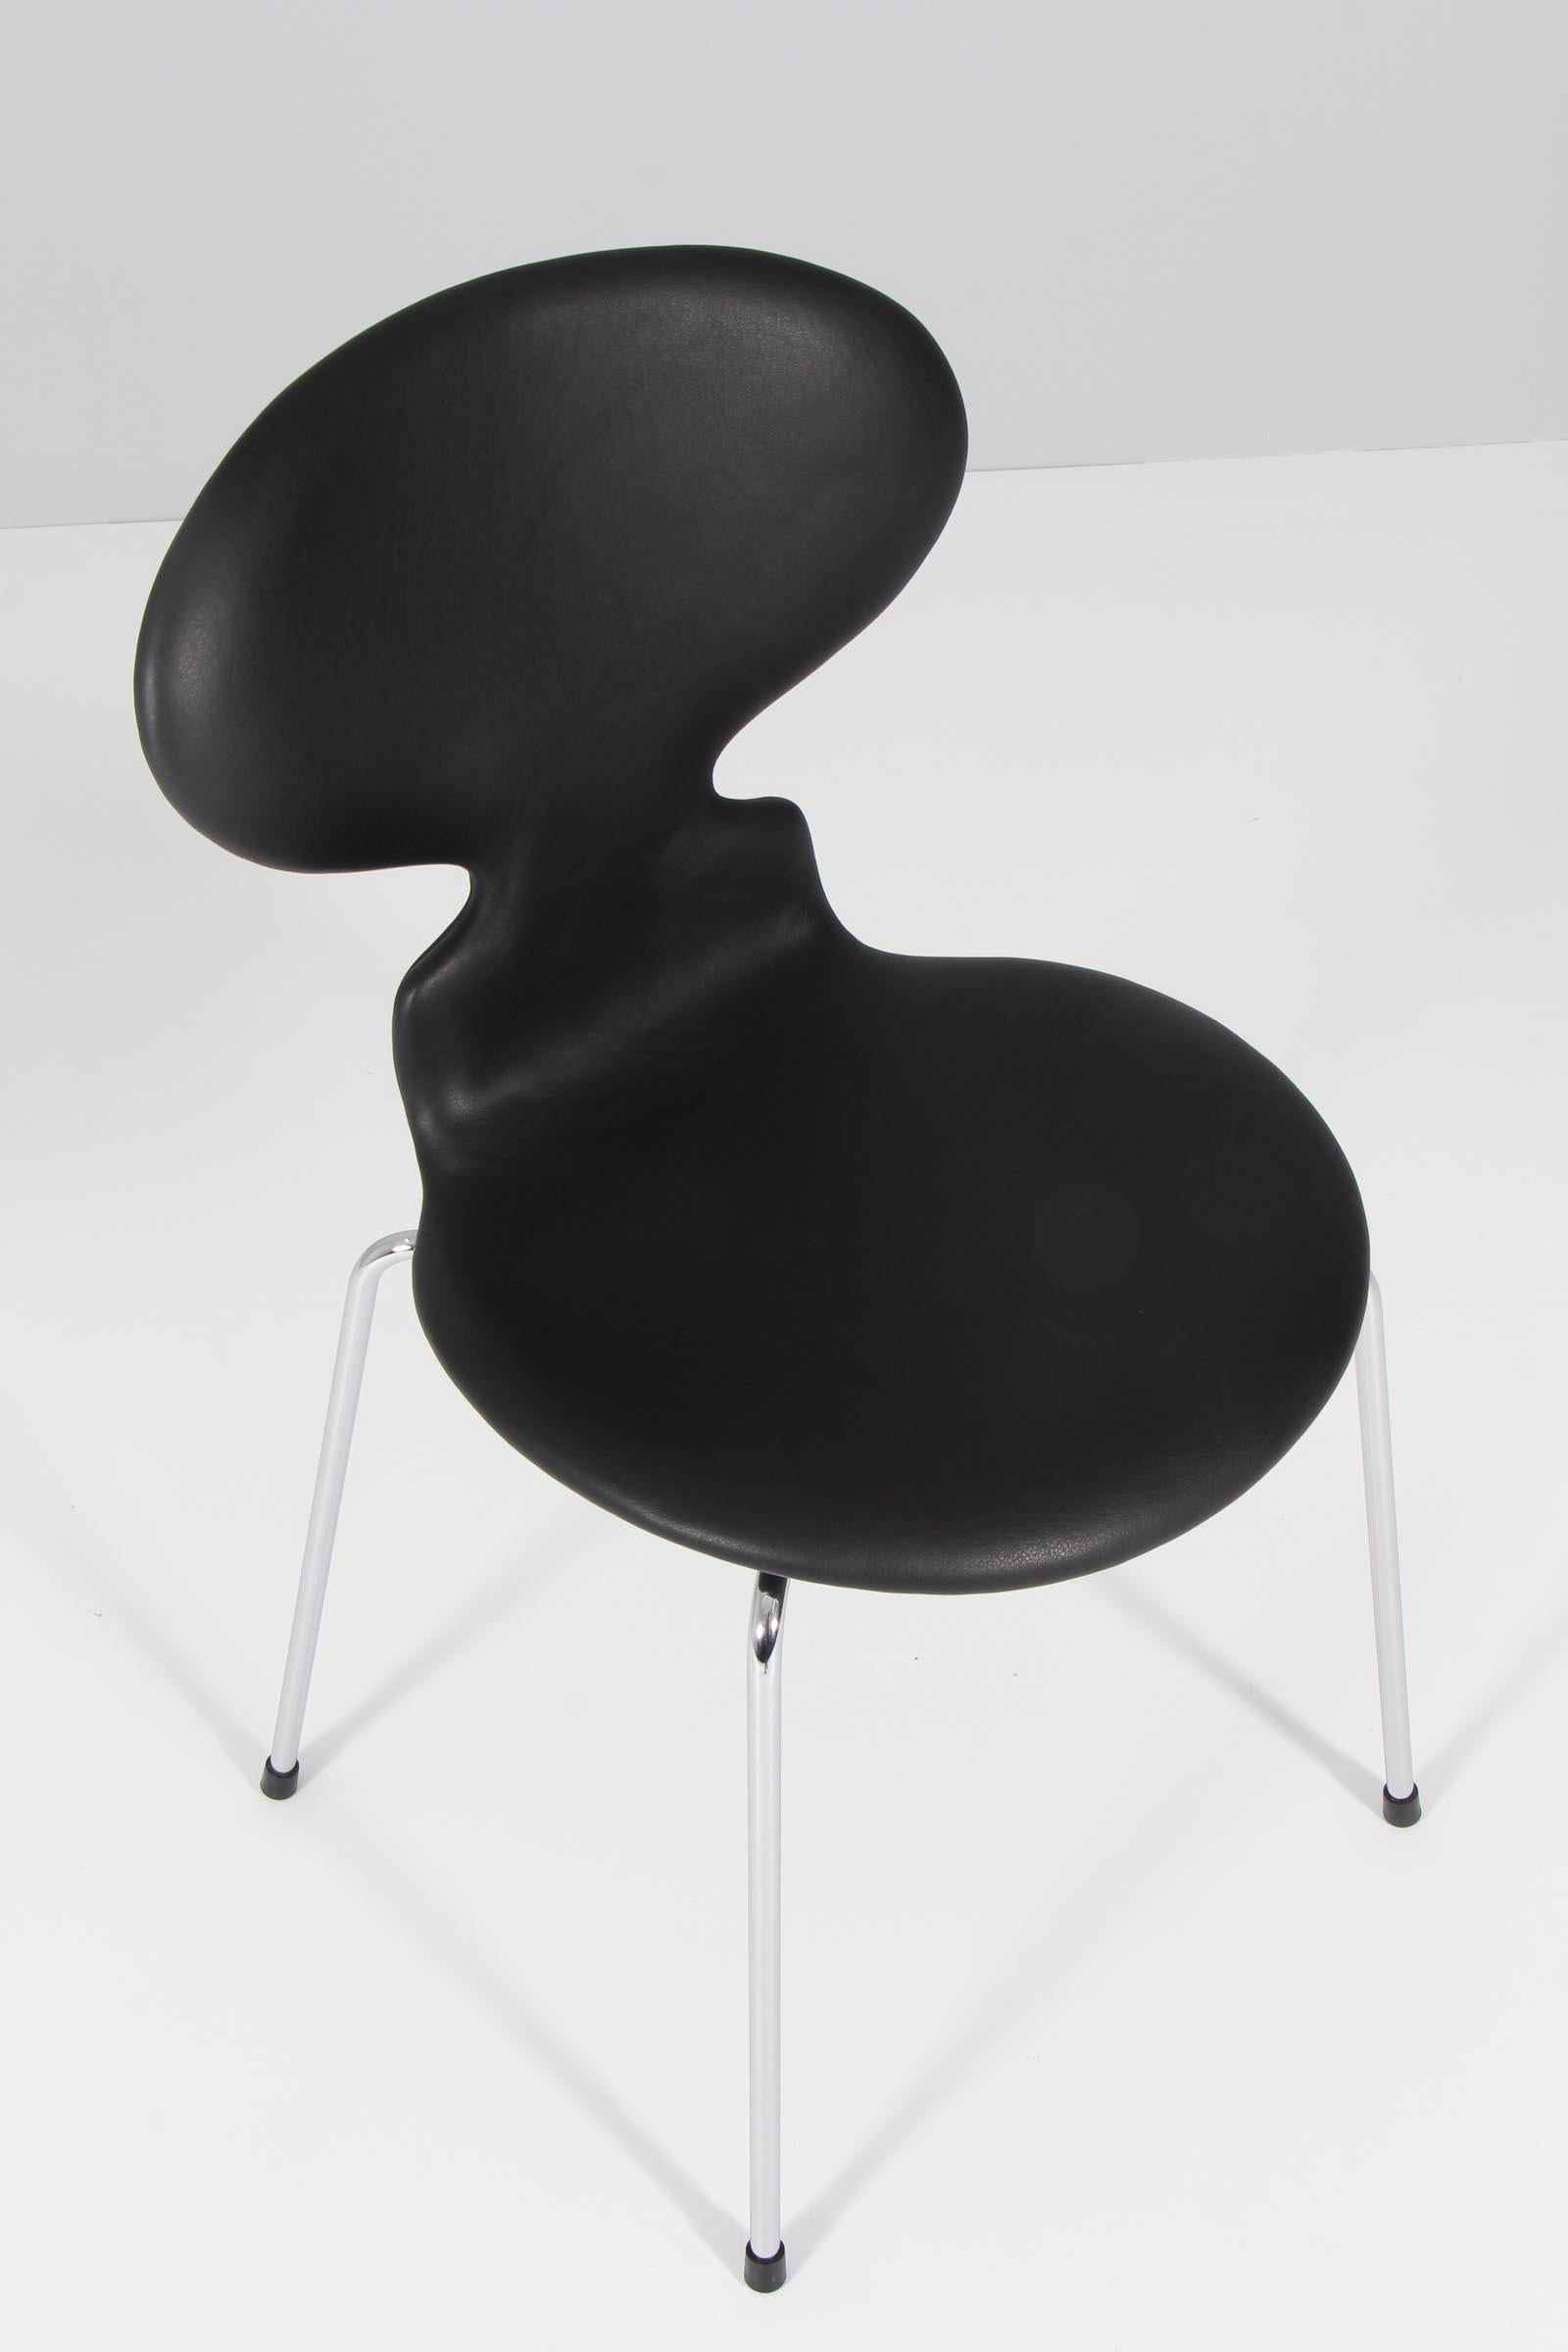 Arne Jacobsen dining chairs, new upholstered with black aniline leather. 

Chromed base. 

Model 3101 